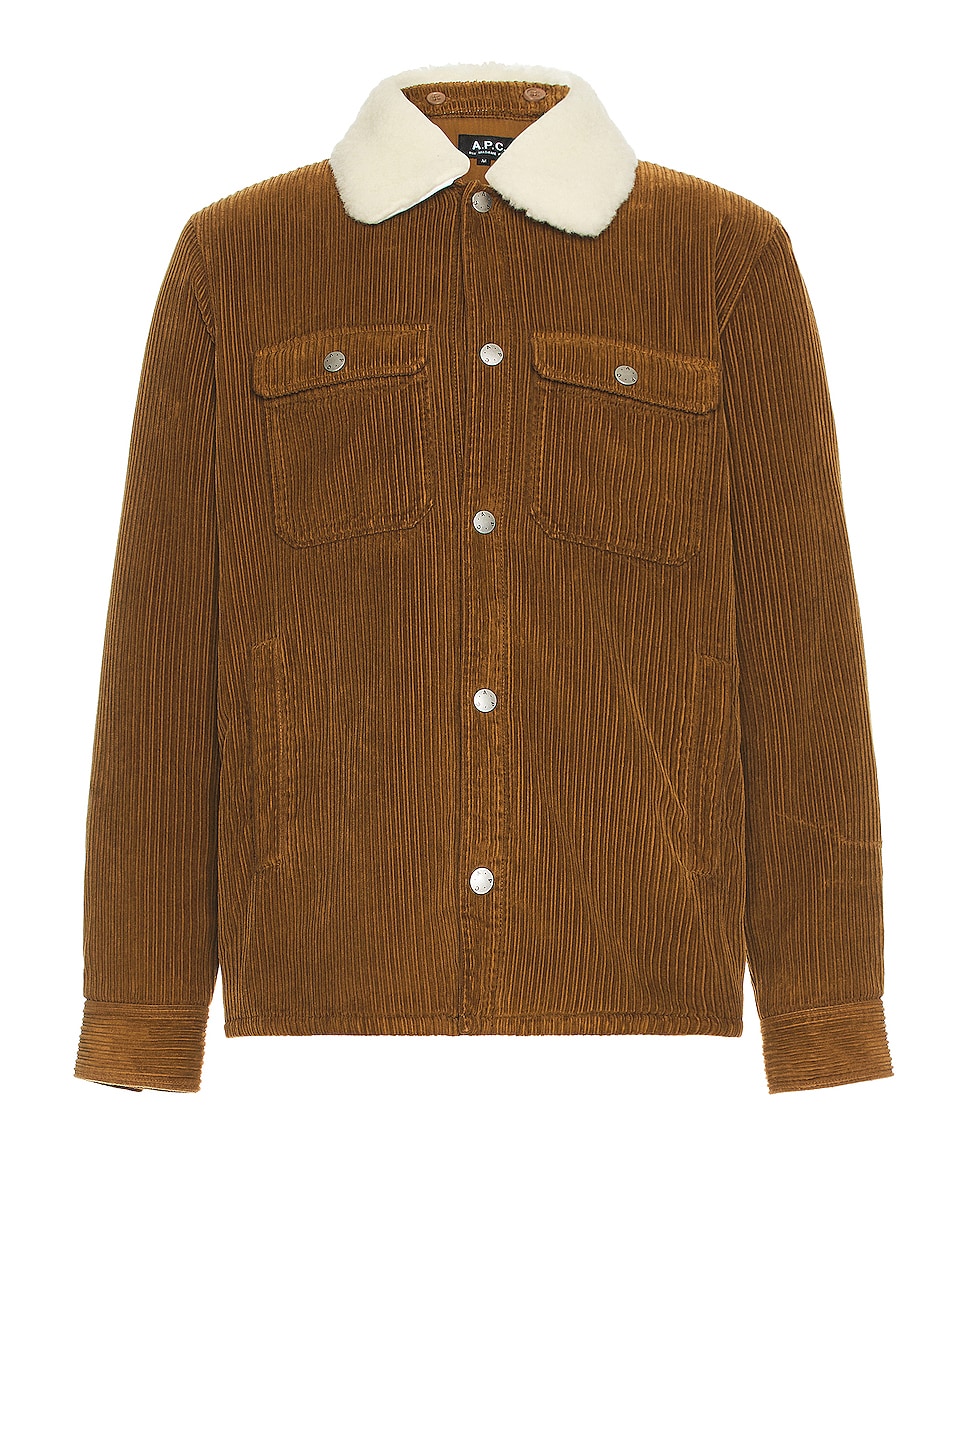 Image 1 of A.P.C. Trucker Jacket in Camel